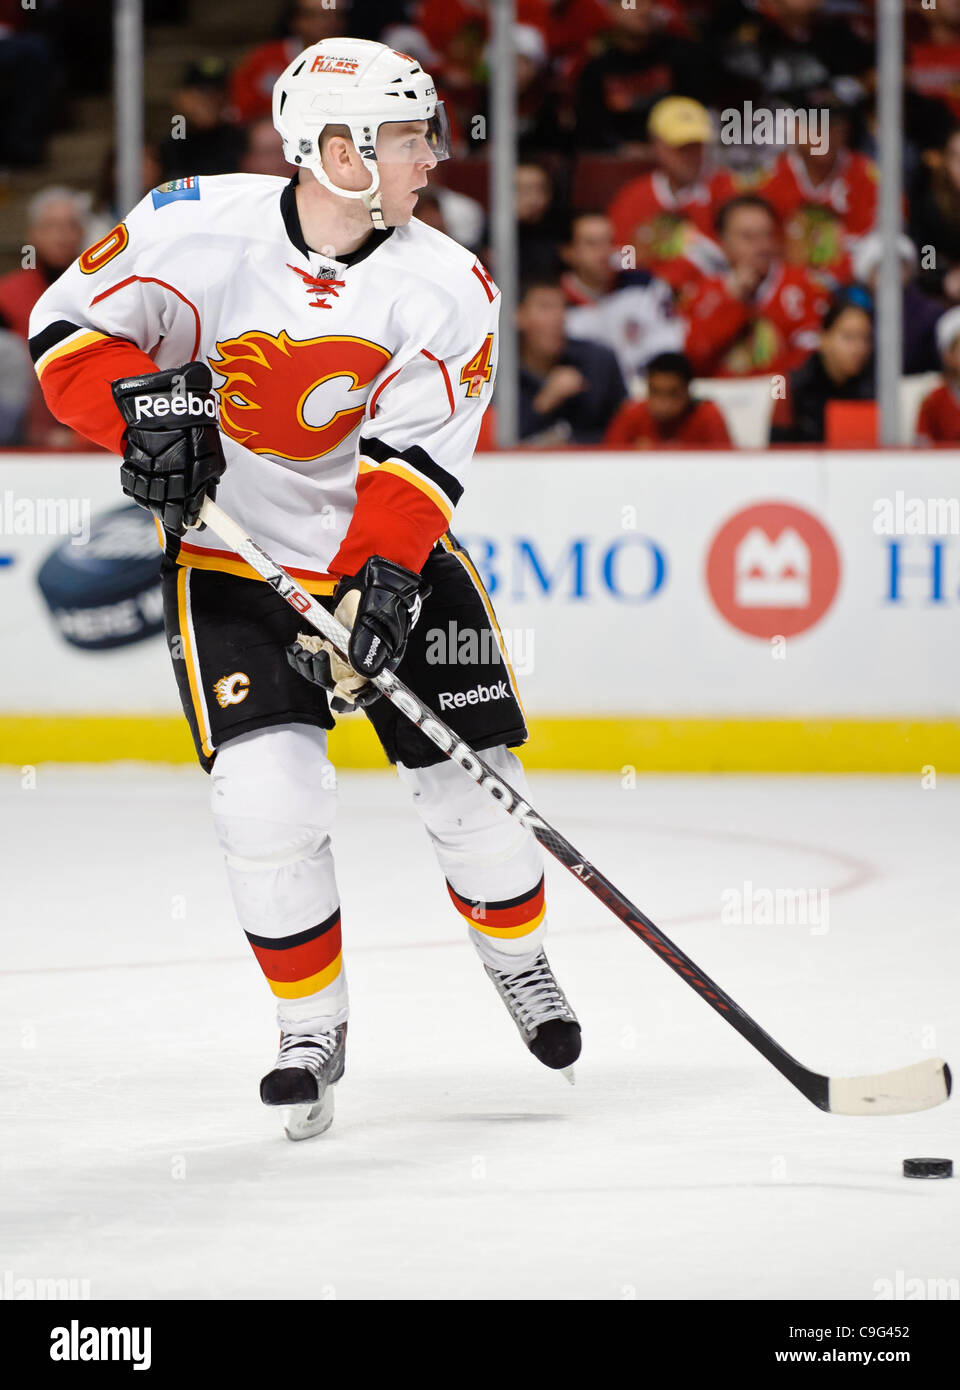 Flames Best #40 Of All Time: Alex Tanguay - Matchsticks and Gasoline